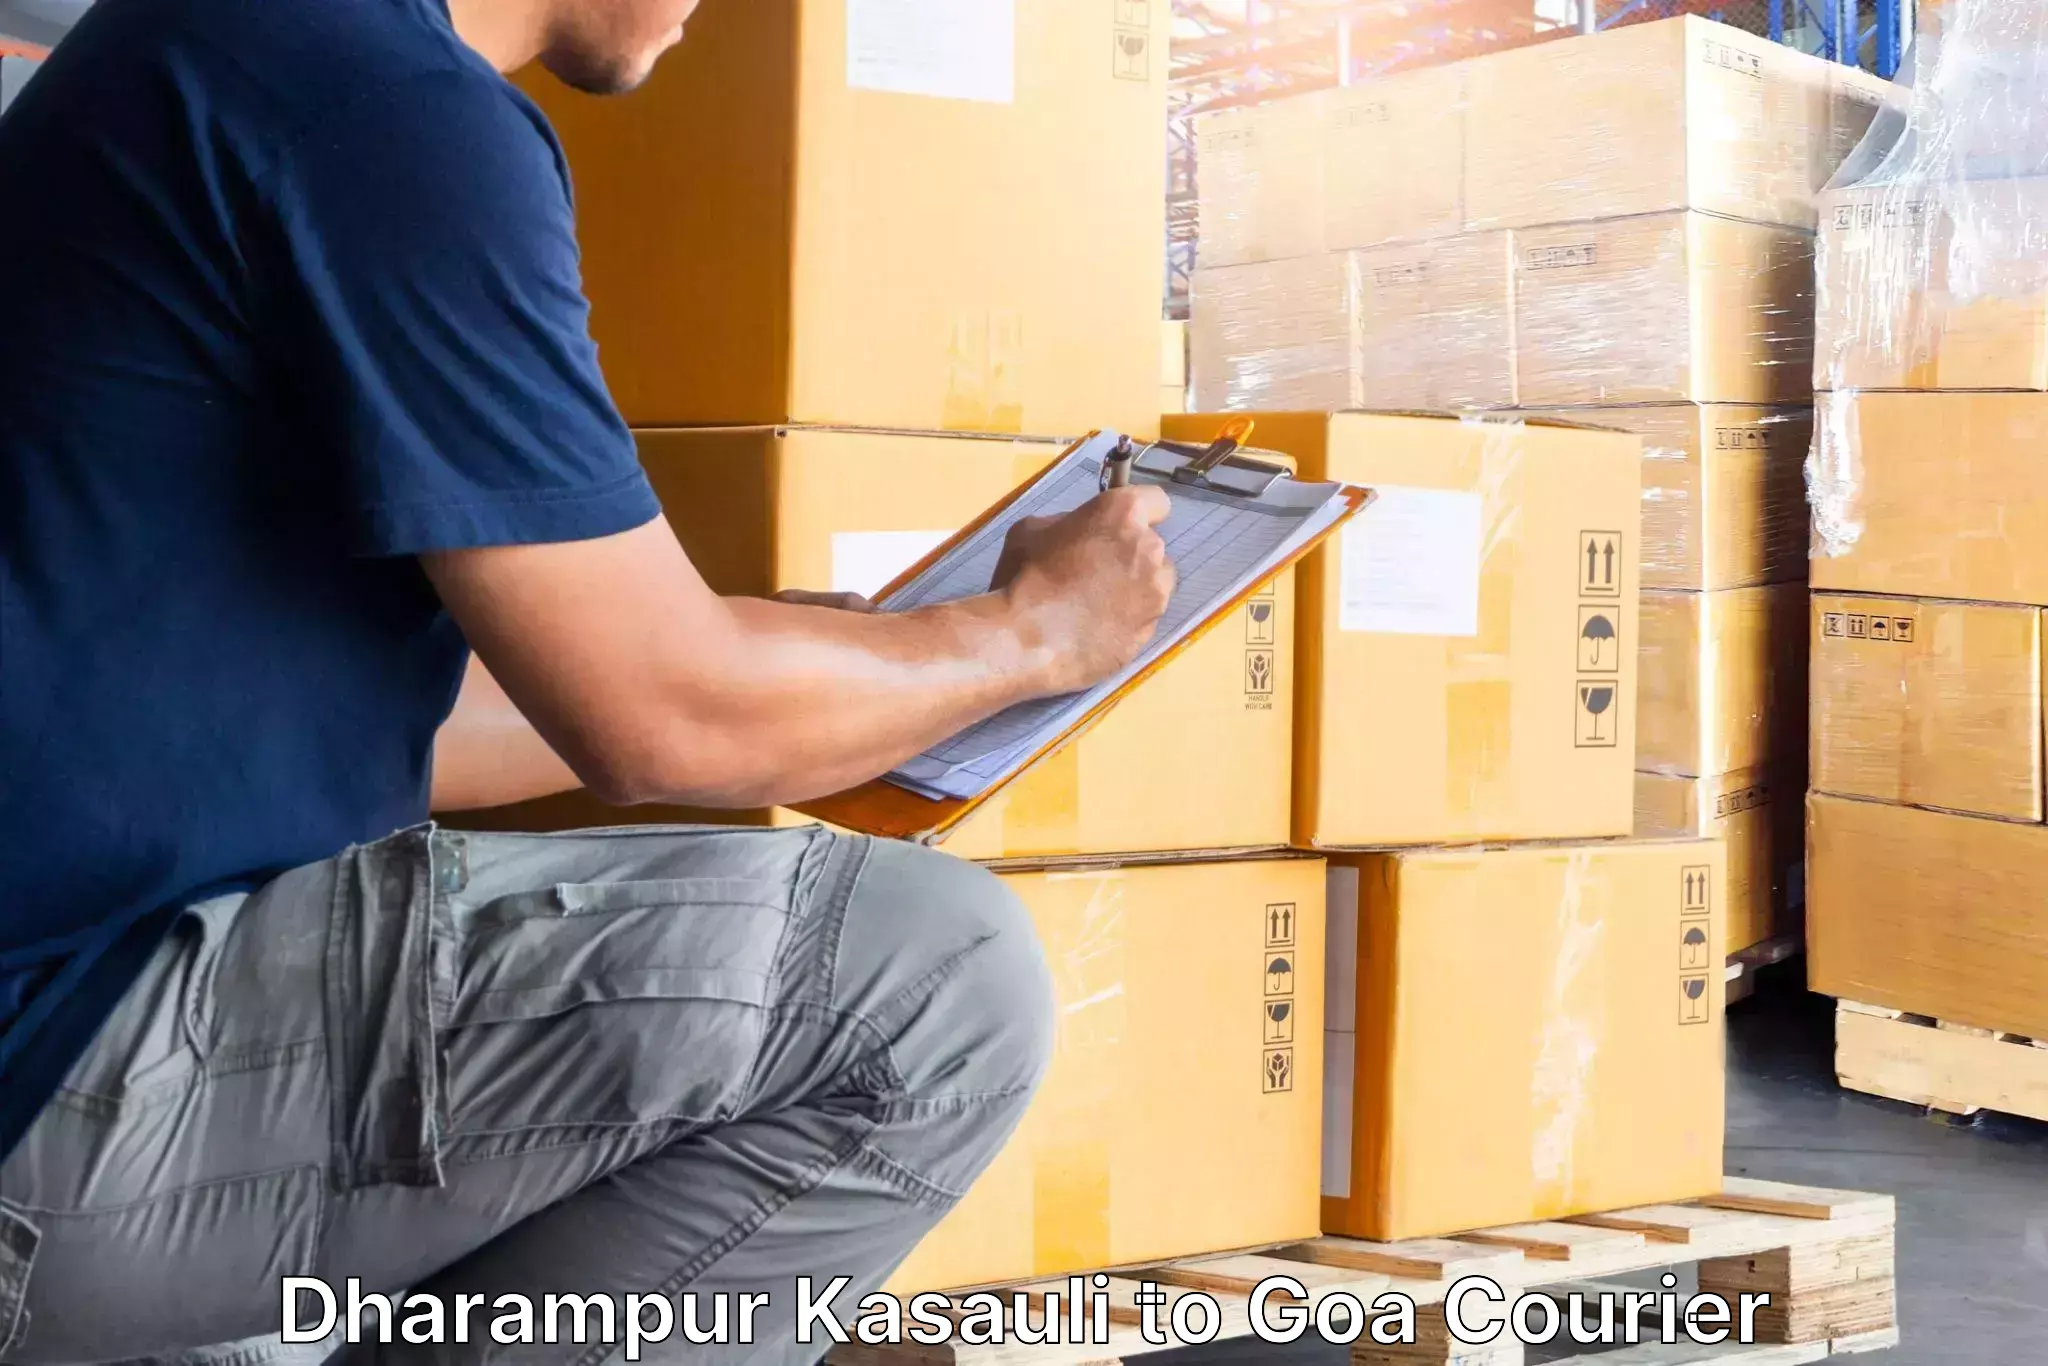 Moving and handling services Dharampur Kasauli to Goa